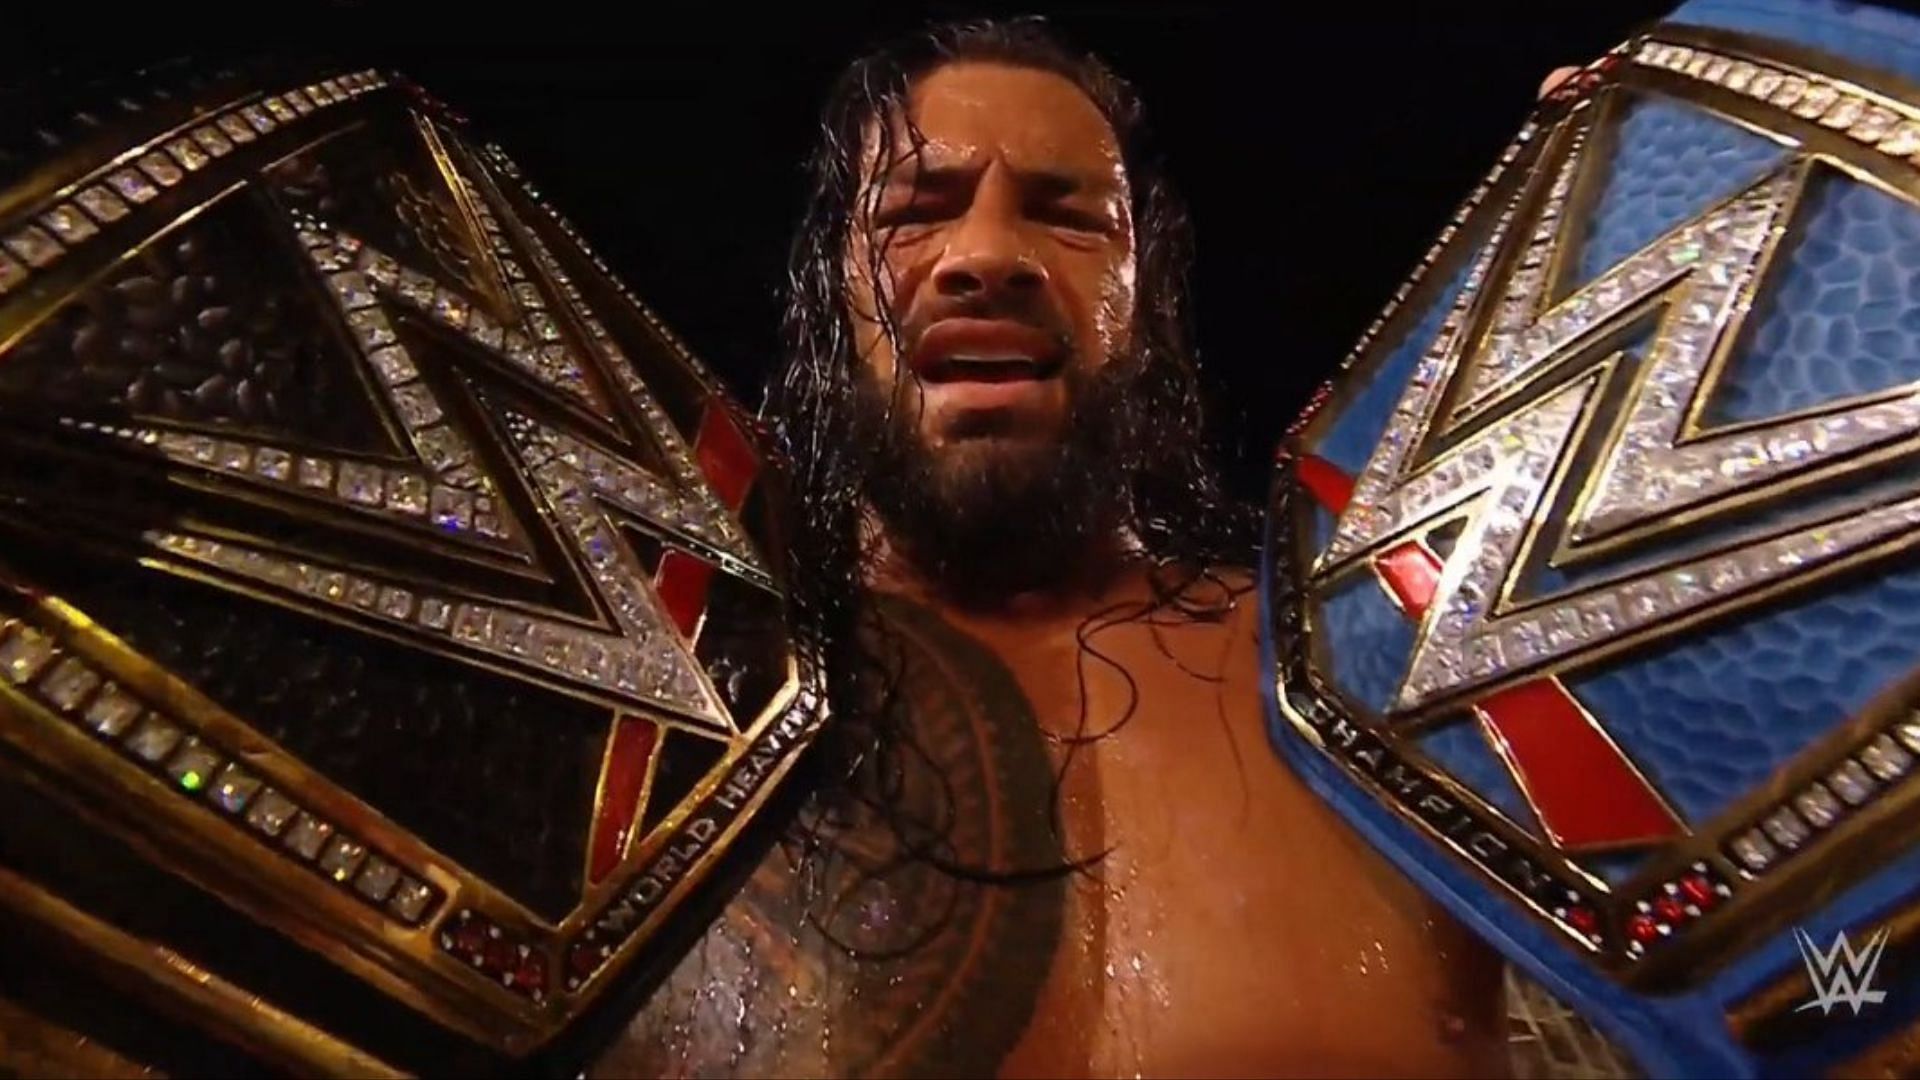 Roman Reigns has been Undisputed WWE Universal Champion for nearly three years!